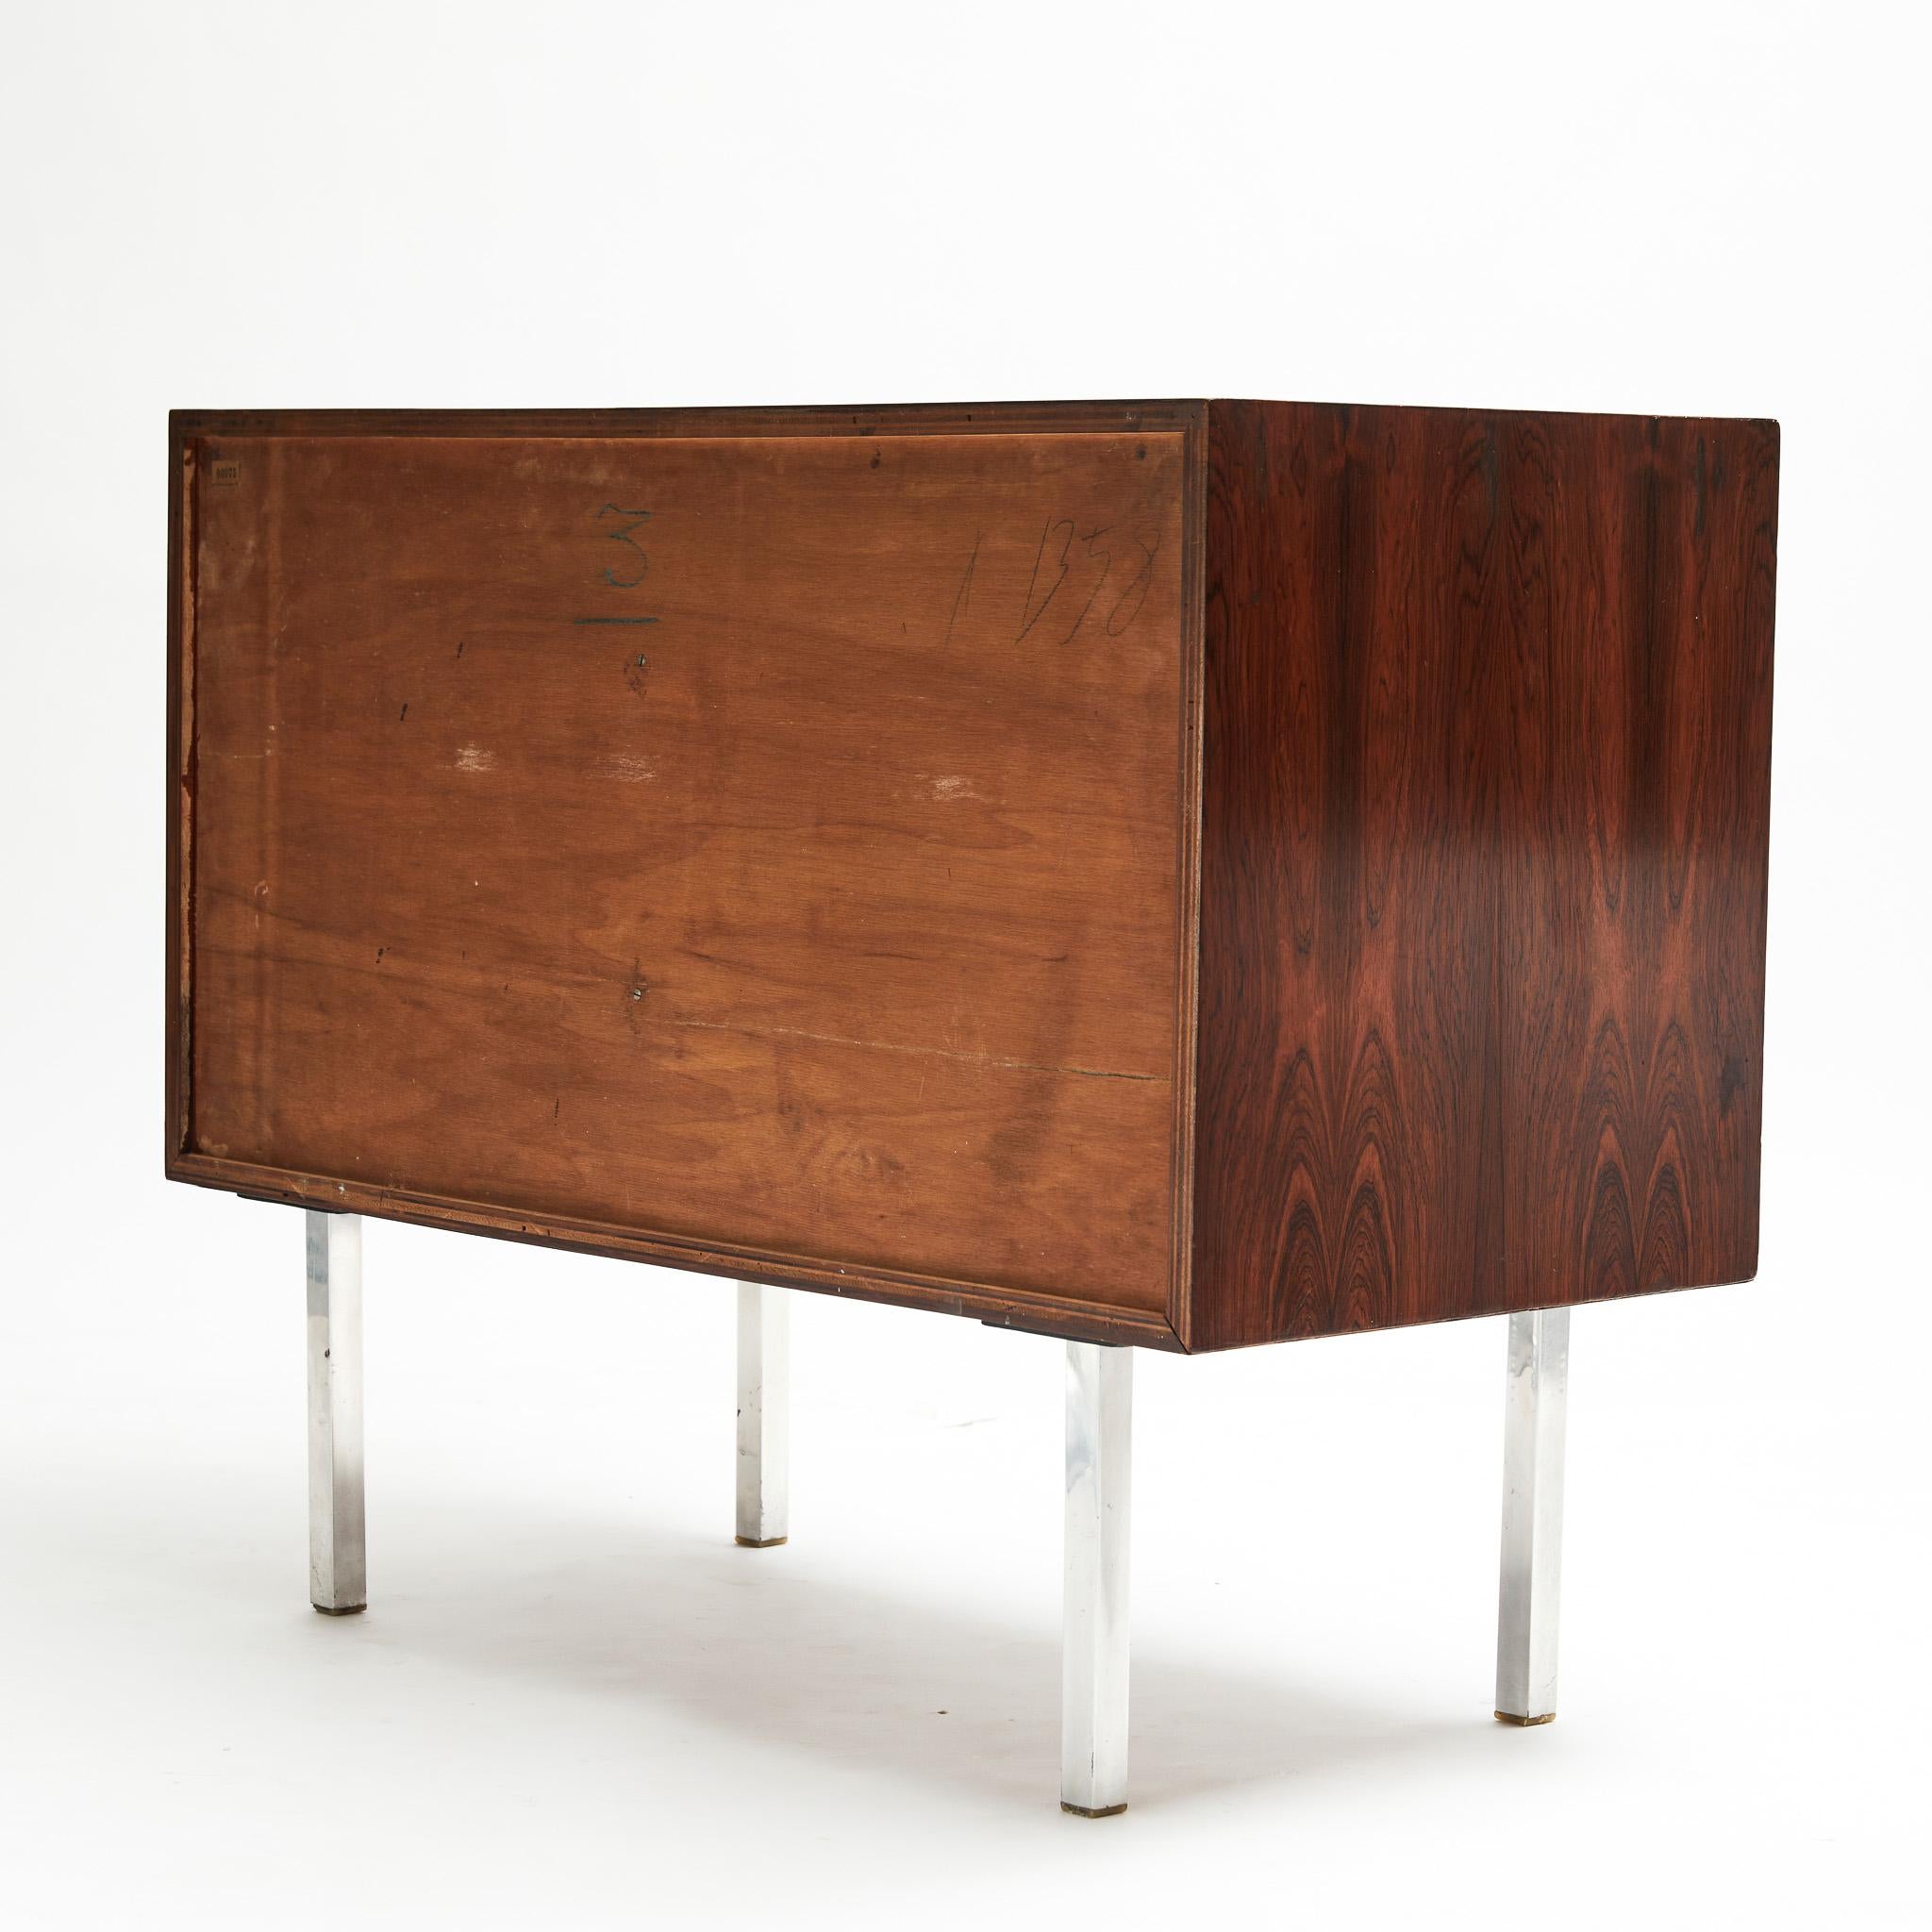 Midcentury Chest in Hardwood & Chrome by Forma Moveis, 1965 Brazil, Sealed In Good Condition For Sale In New York, NY